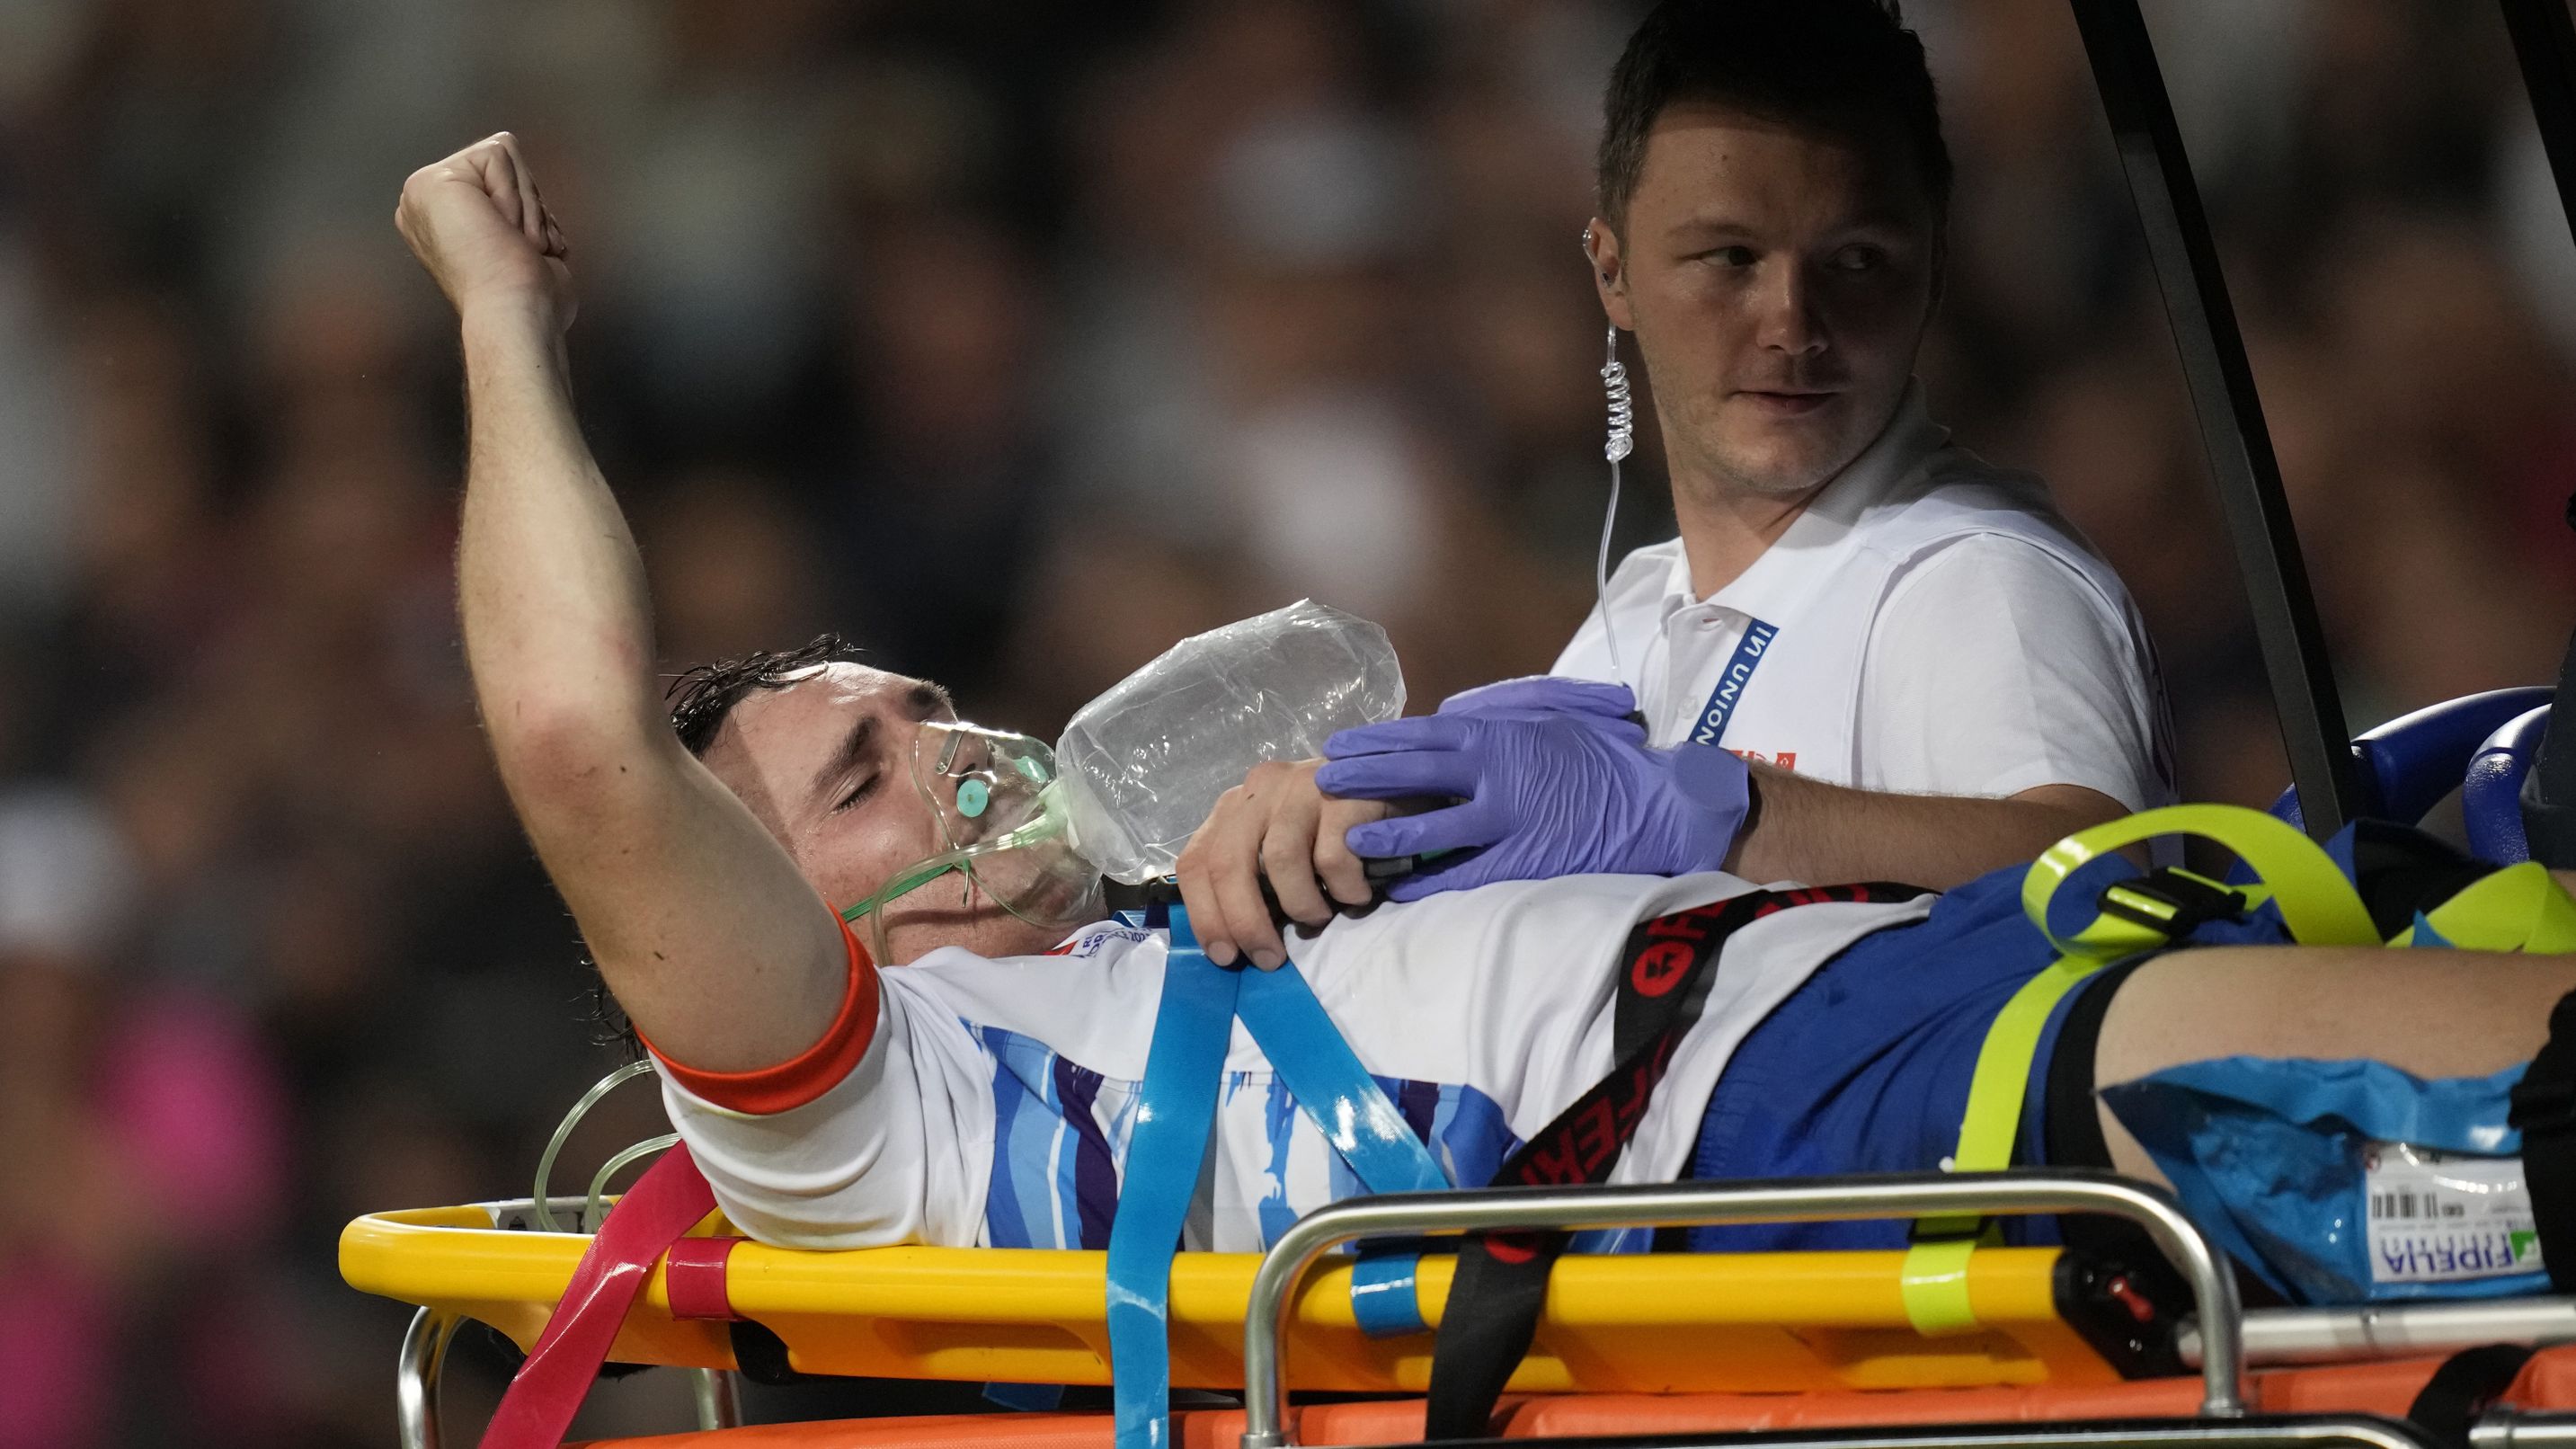 Le Roux Malan is taken off the field on a stretcher after getting injured during the Rugby World Cup Pool A match between New Zealand and Namibia.